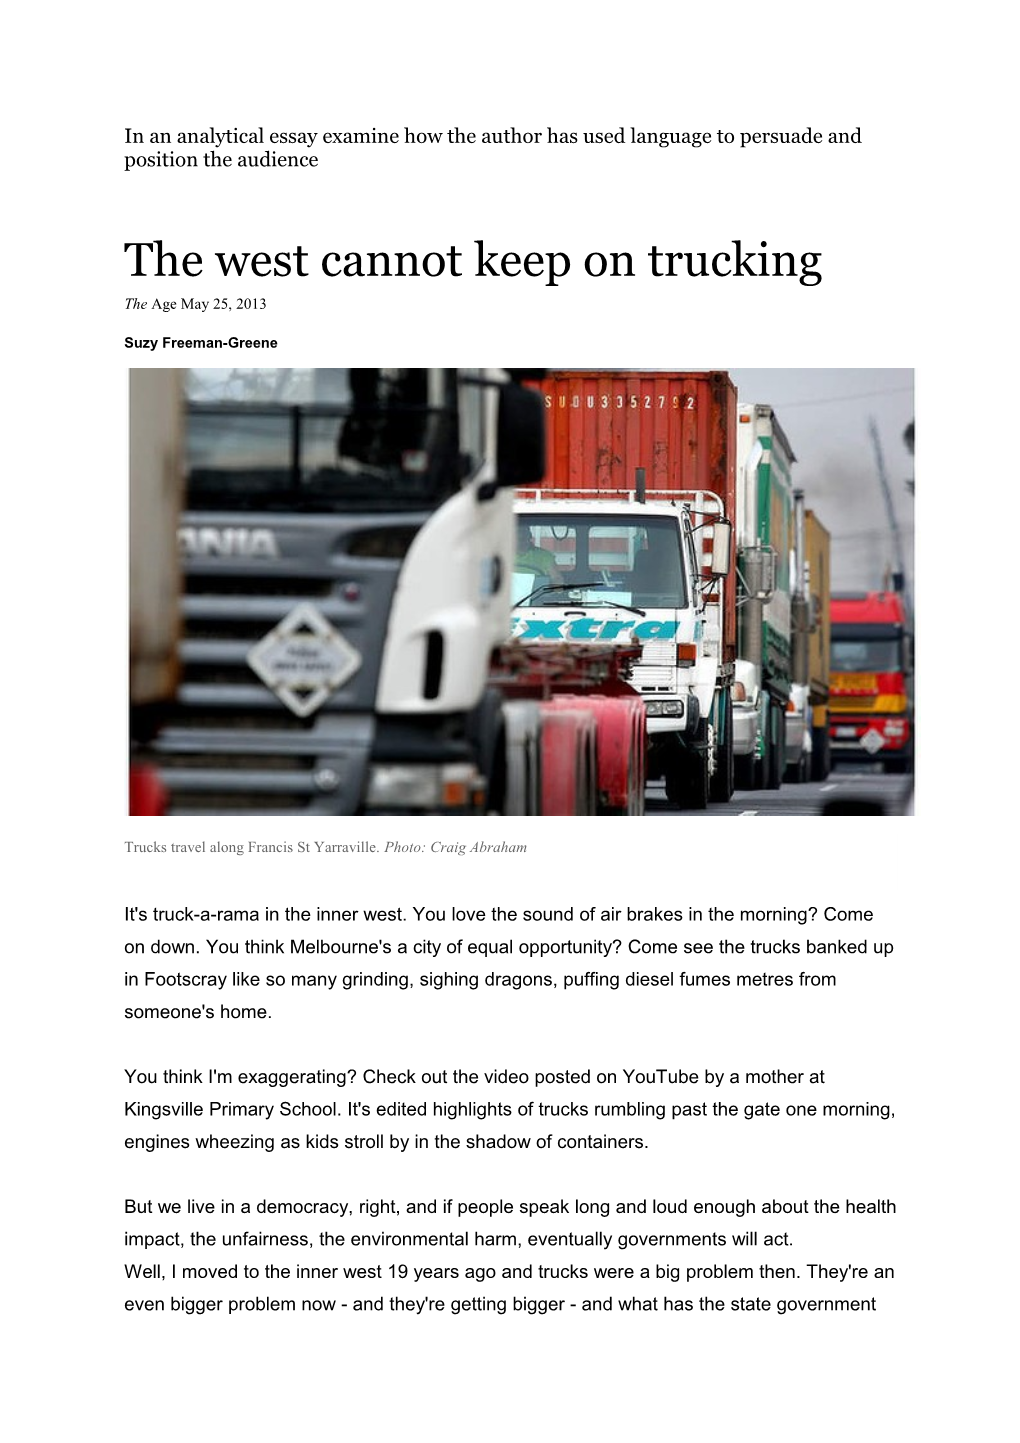 The West Cannot Keep on Trucking